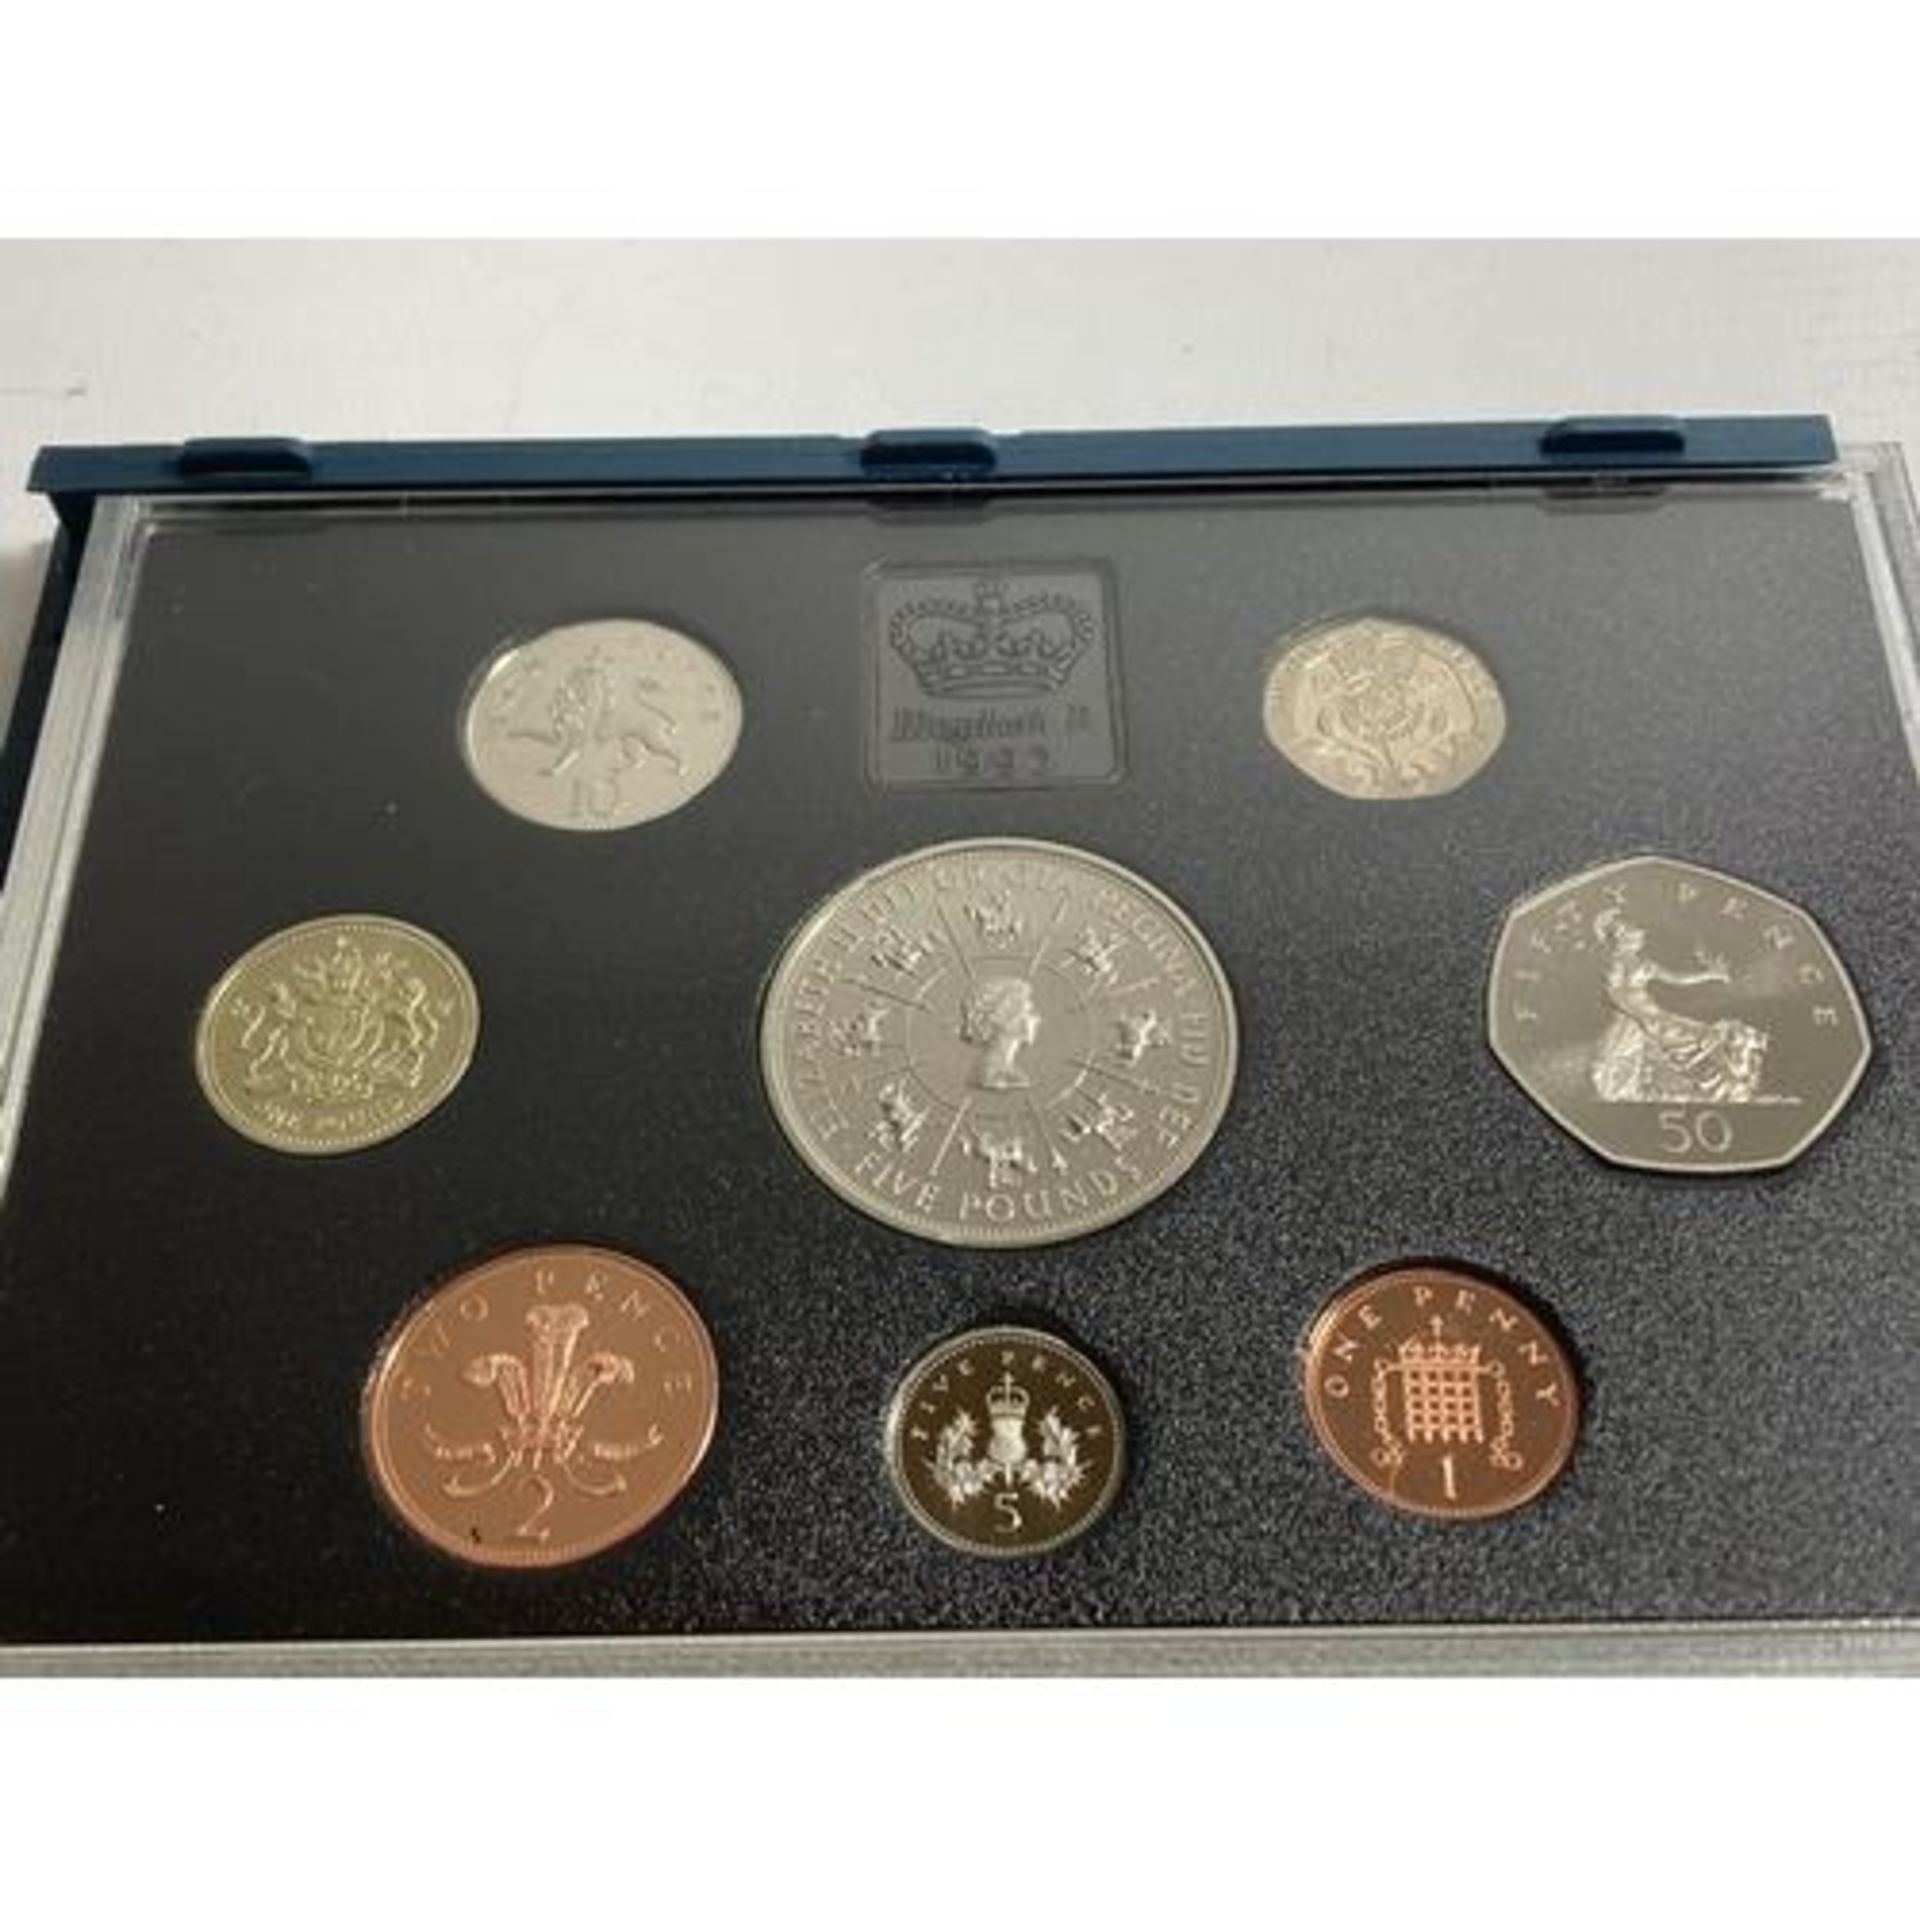 THE 2013 UK DEFINITIVE COIN SET - Image 2 of 2